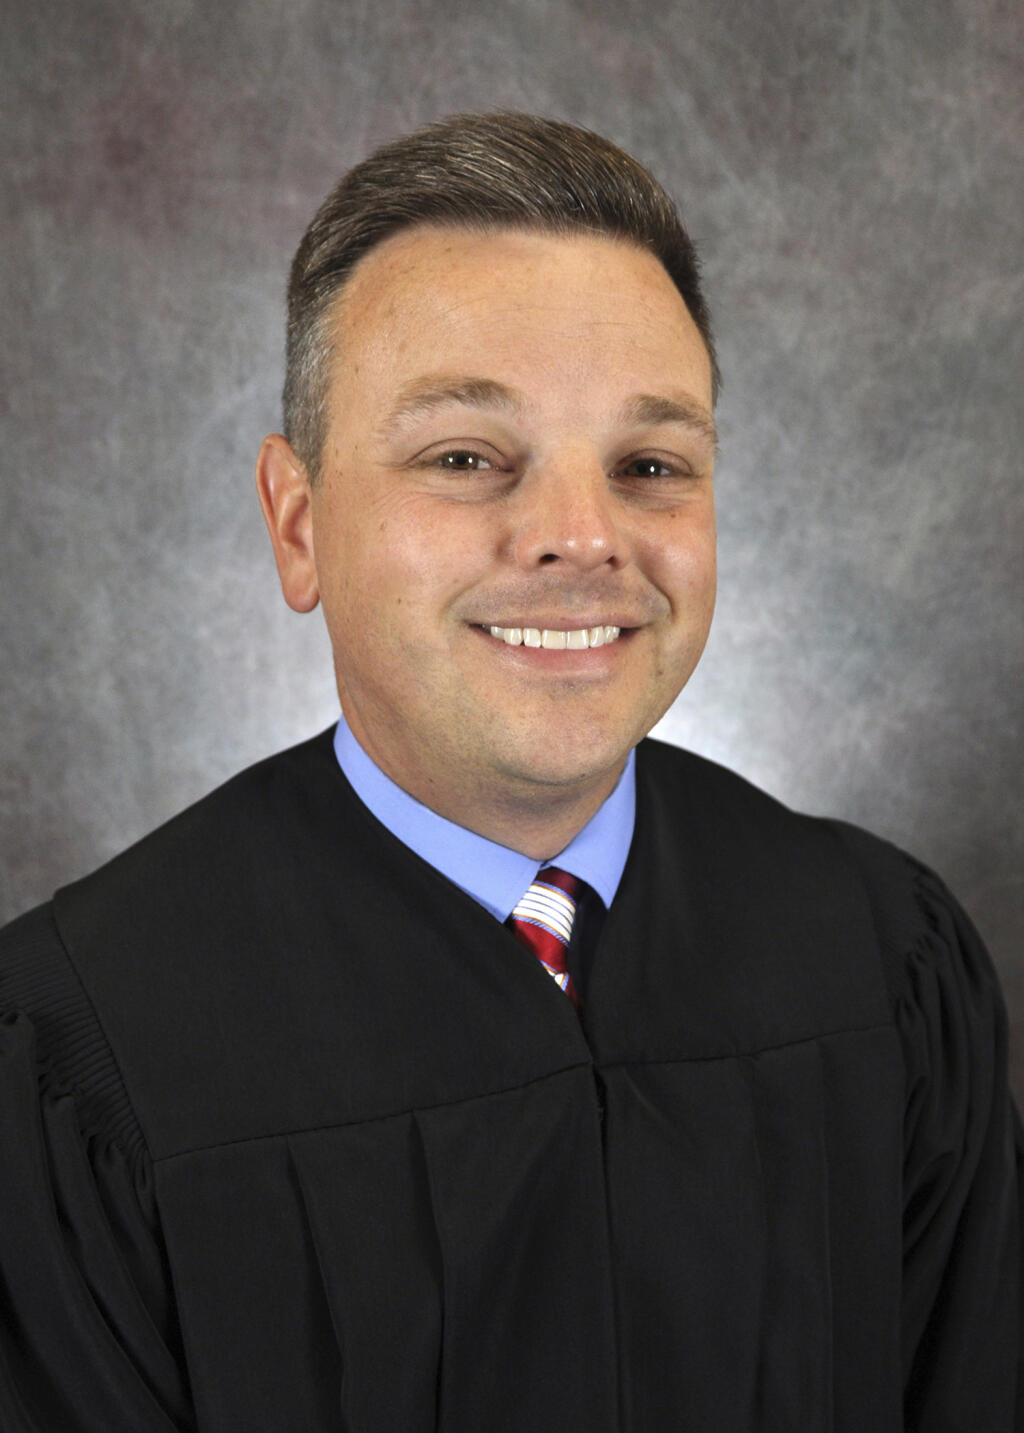 This undated photo provided by the Kentucky Administrative Office of the Courts on Sunday, Dec. 12, 2021 shows District Judge Brian Crick. (Kentucky Administrative Office of the Courts via AP)